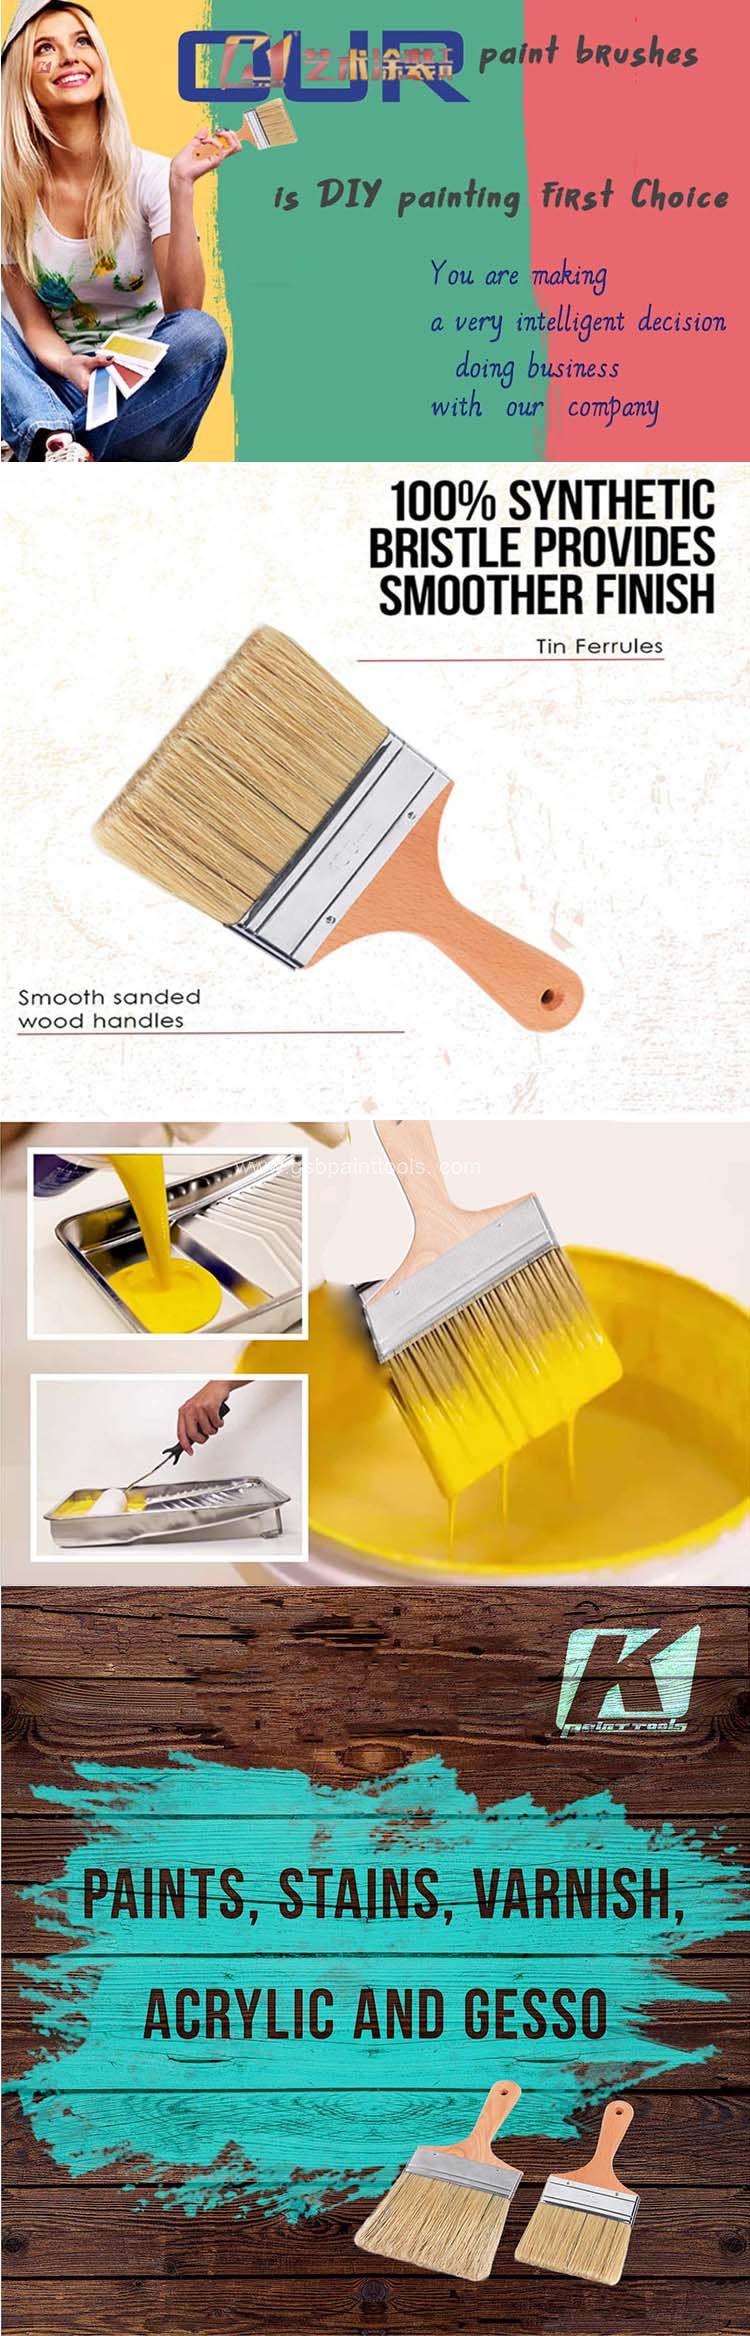 Supply Variety Size  Bristle Artist Paint Brushes with wood handle for Paint, Stains, Varnishes, Glues, and Gesso